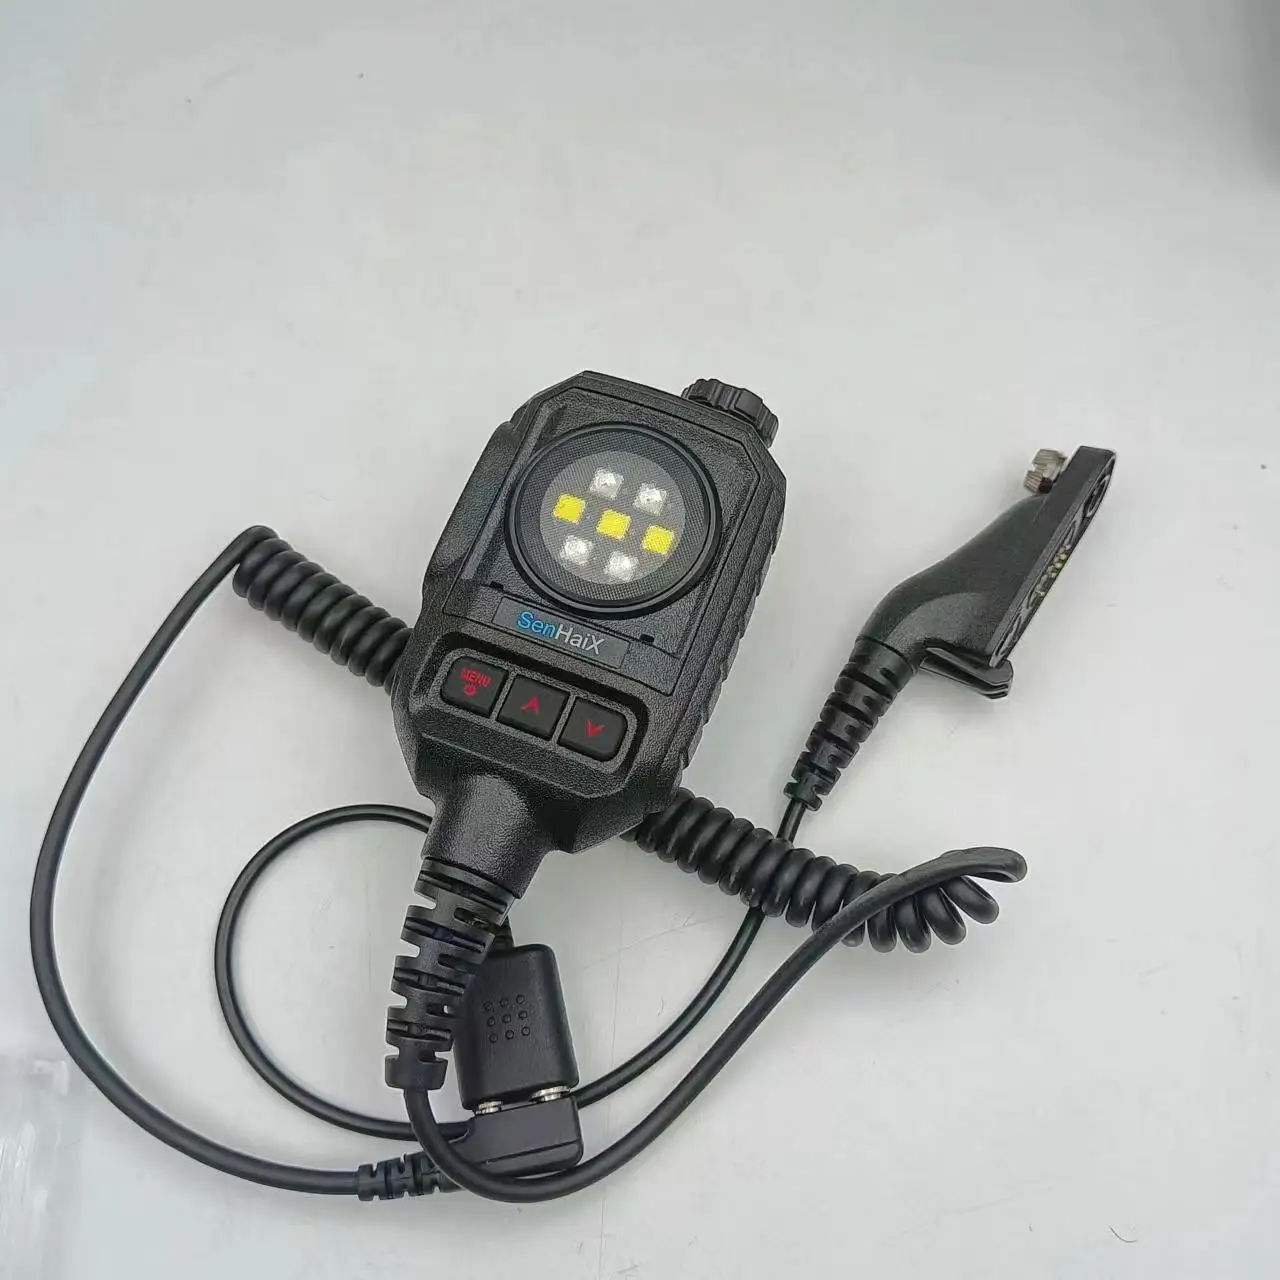 microphone With lighting and flash function Volume adjustment for motorola DP4801e walkie talkie